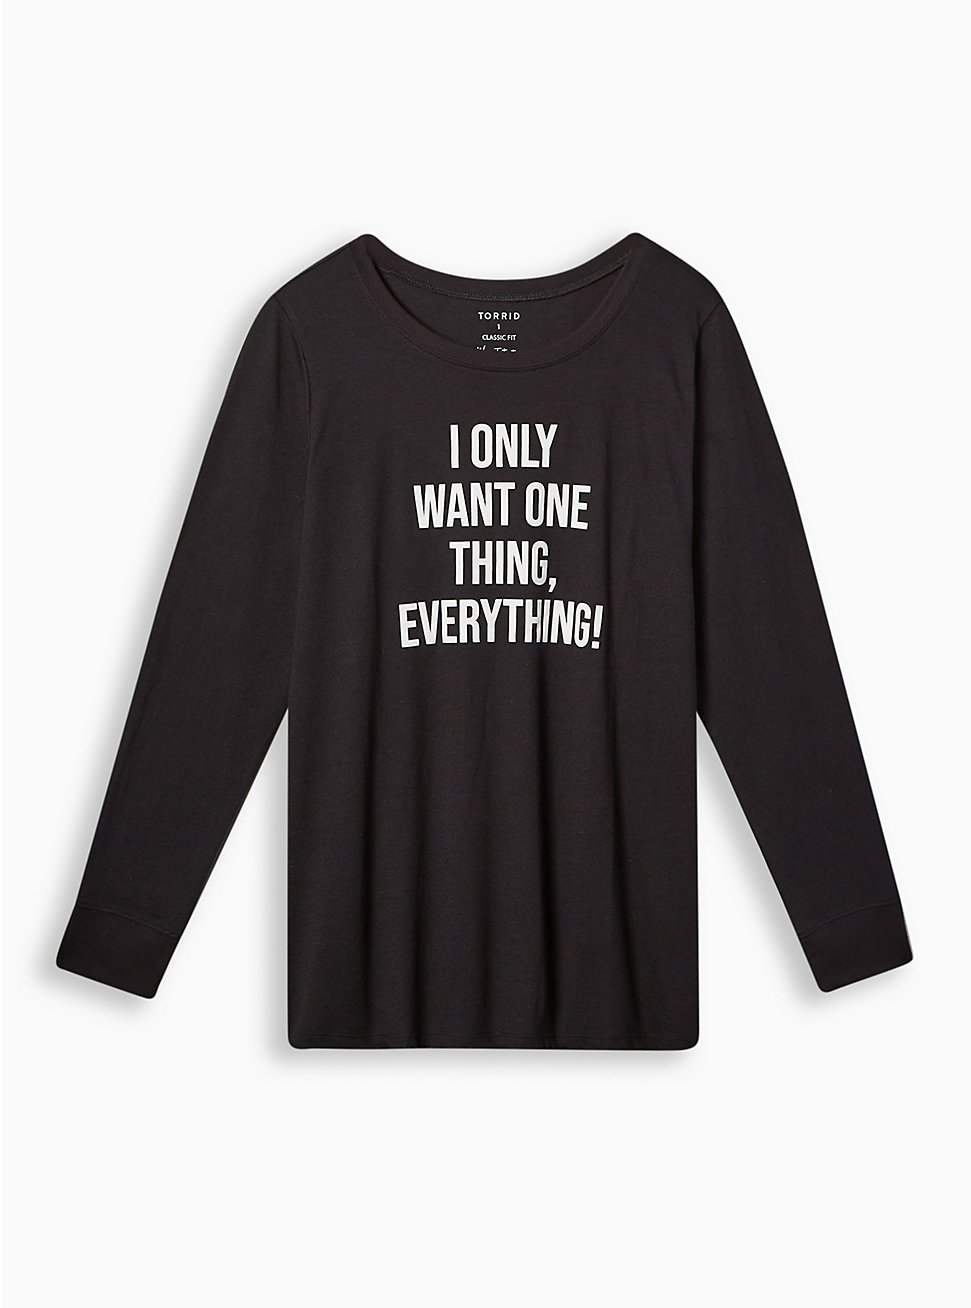 I Want One Thing Classic Fit Signature Jersey Crew Neck Long Sleeve Tee, DEEP BLACK, hi-res